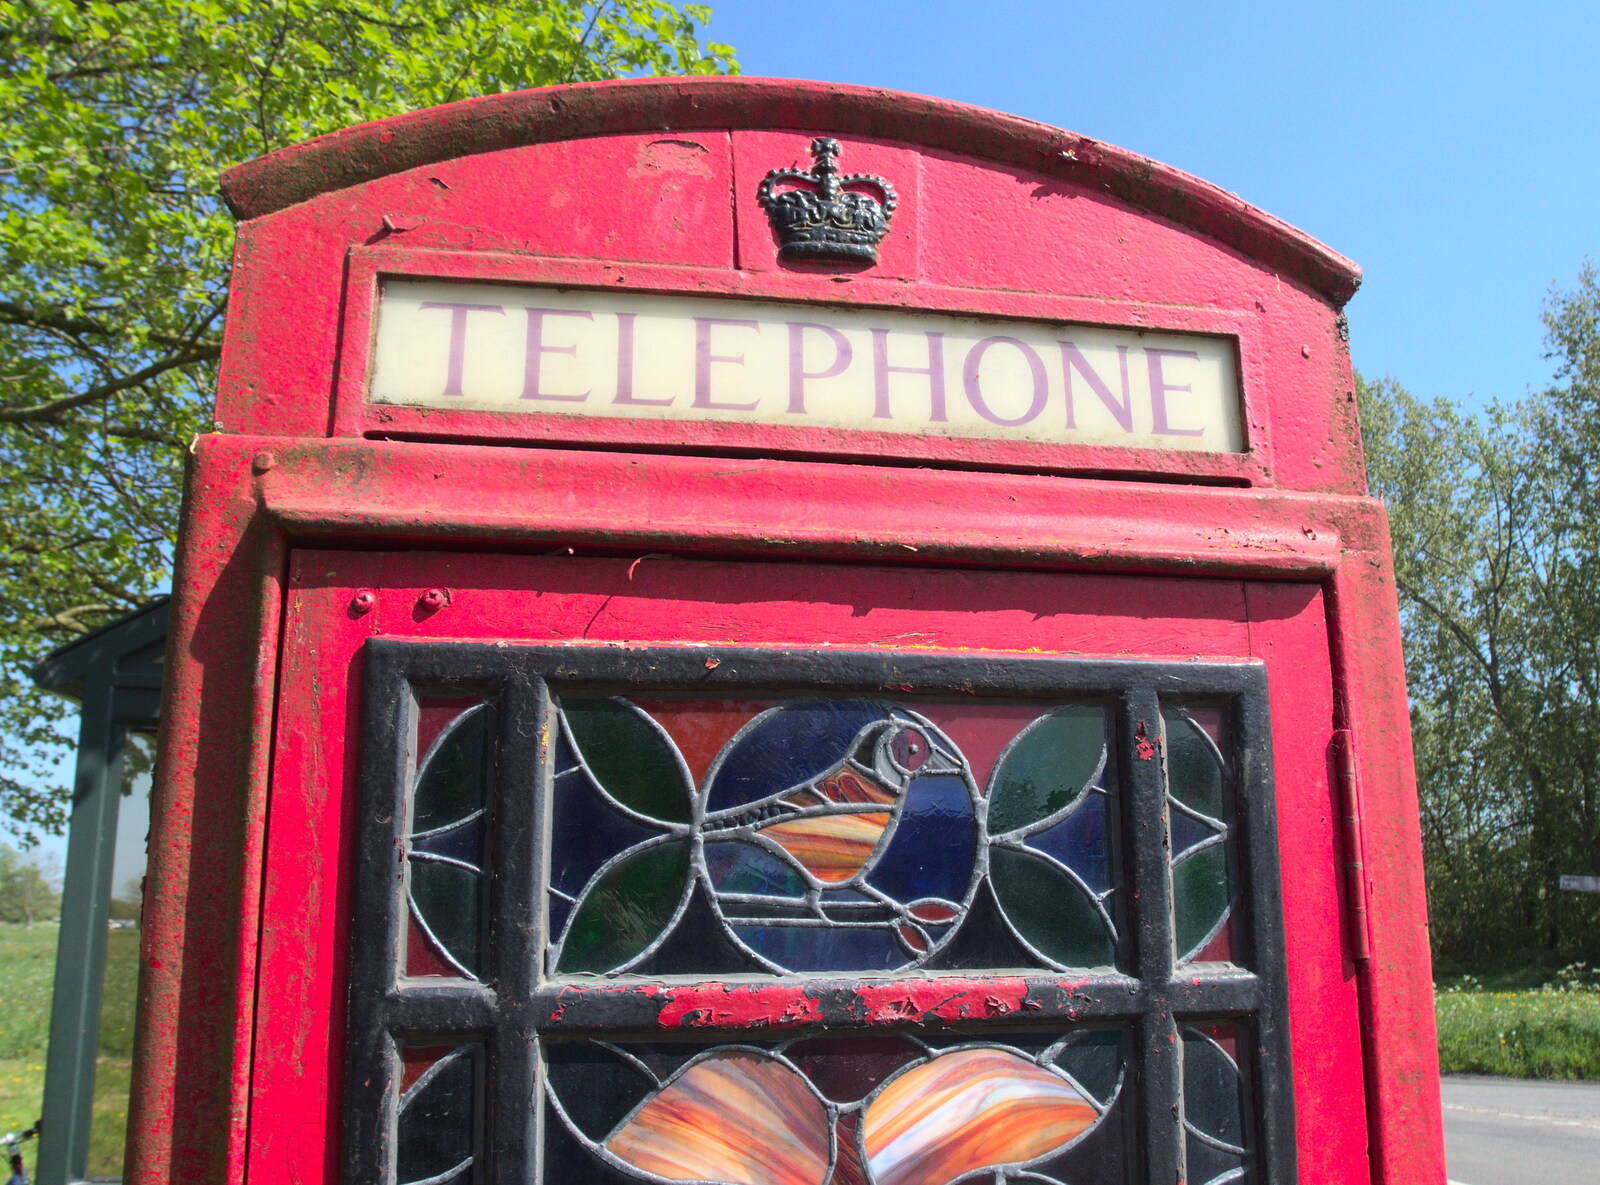 The Mellis K6 phone box from A Bike Ride to the Railway Tavern, Mellis, Suffolk - 7th May 2018